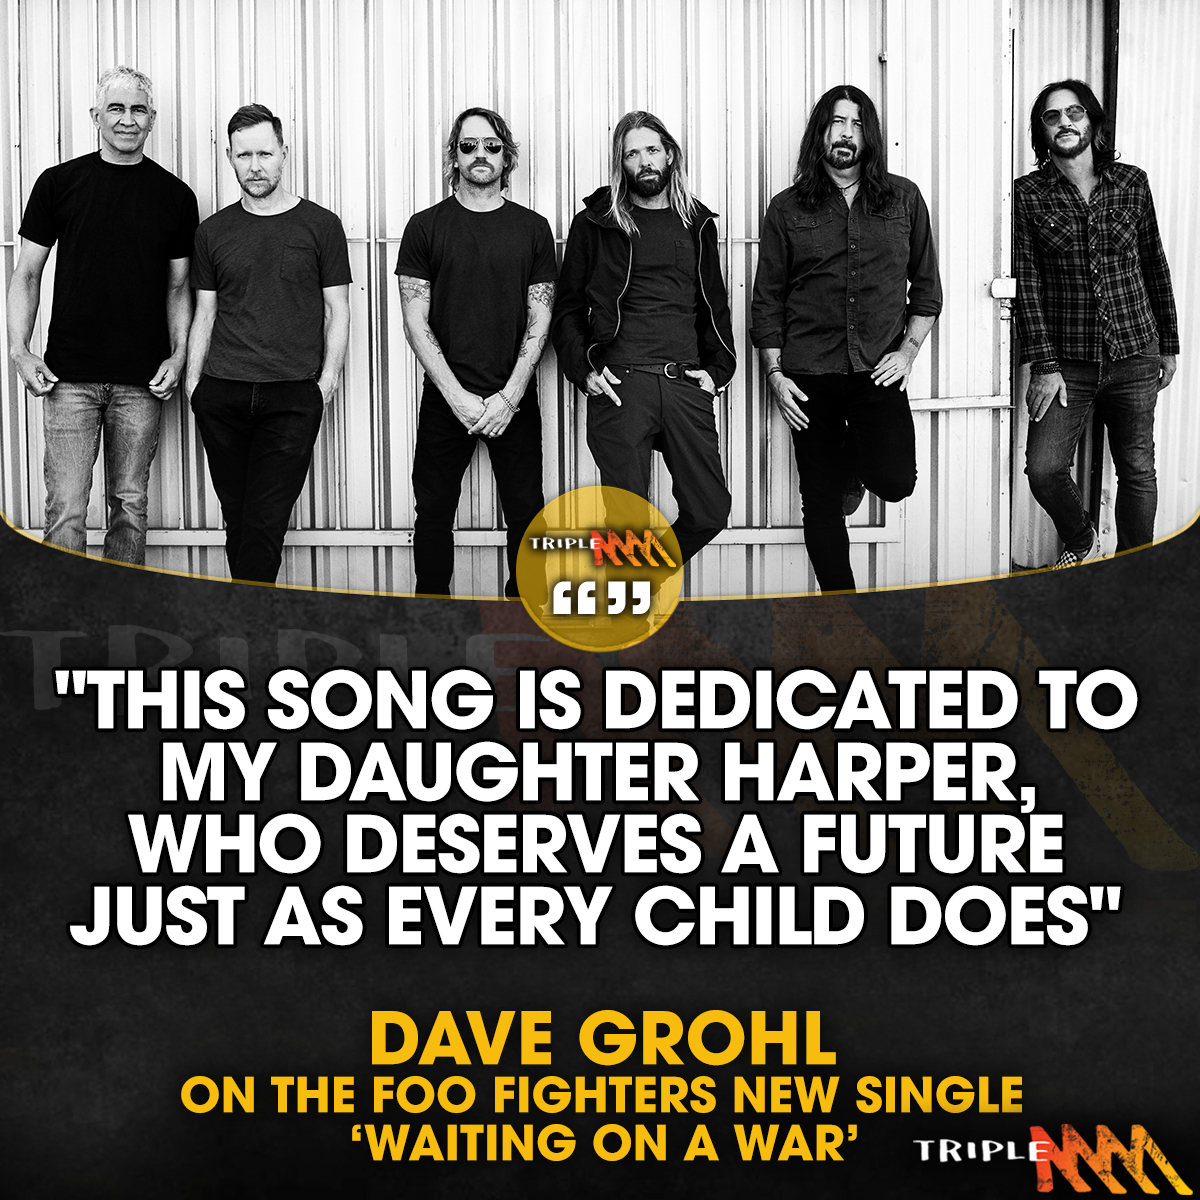 Dave Grohl talks about the new Foo Fighters single 'Waiting On A War'